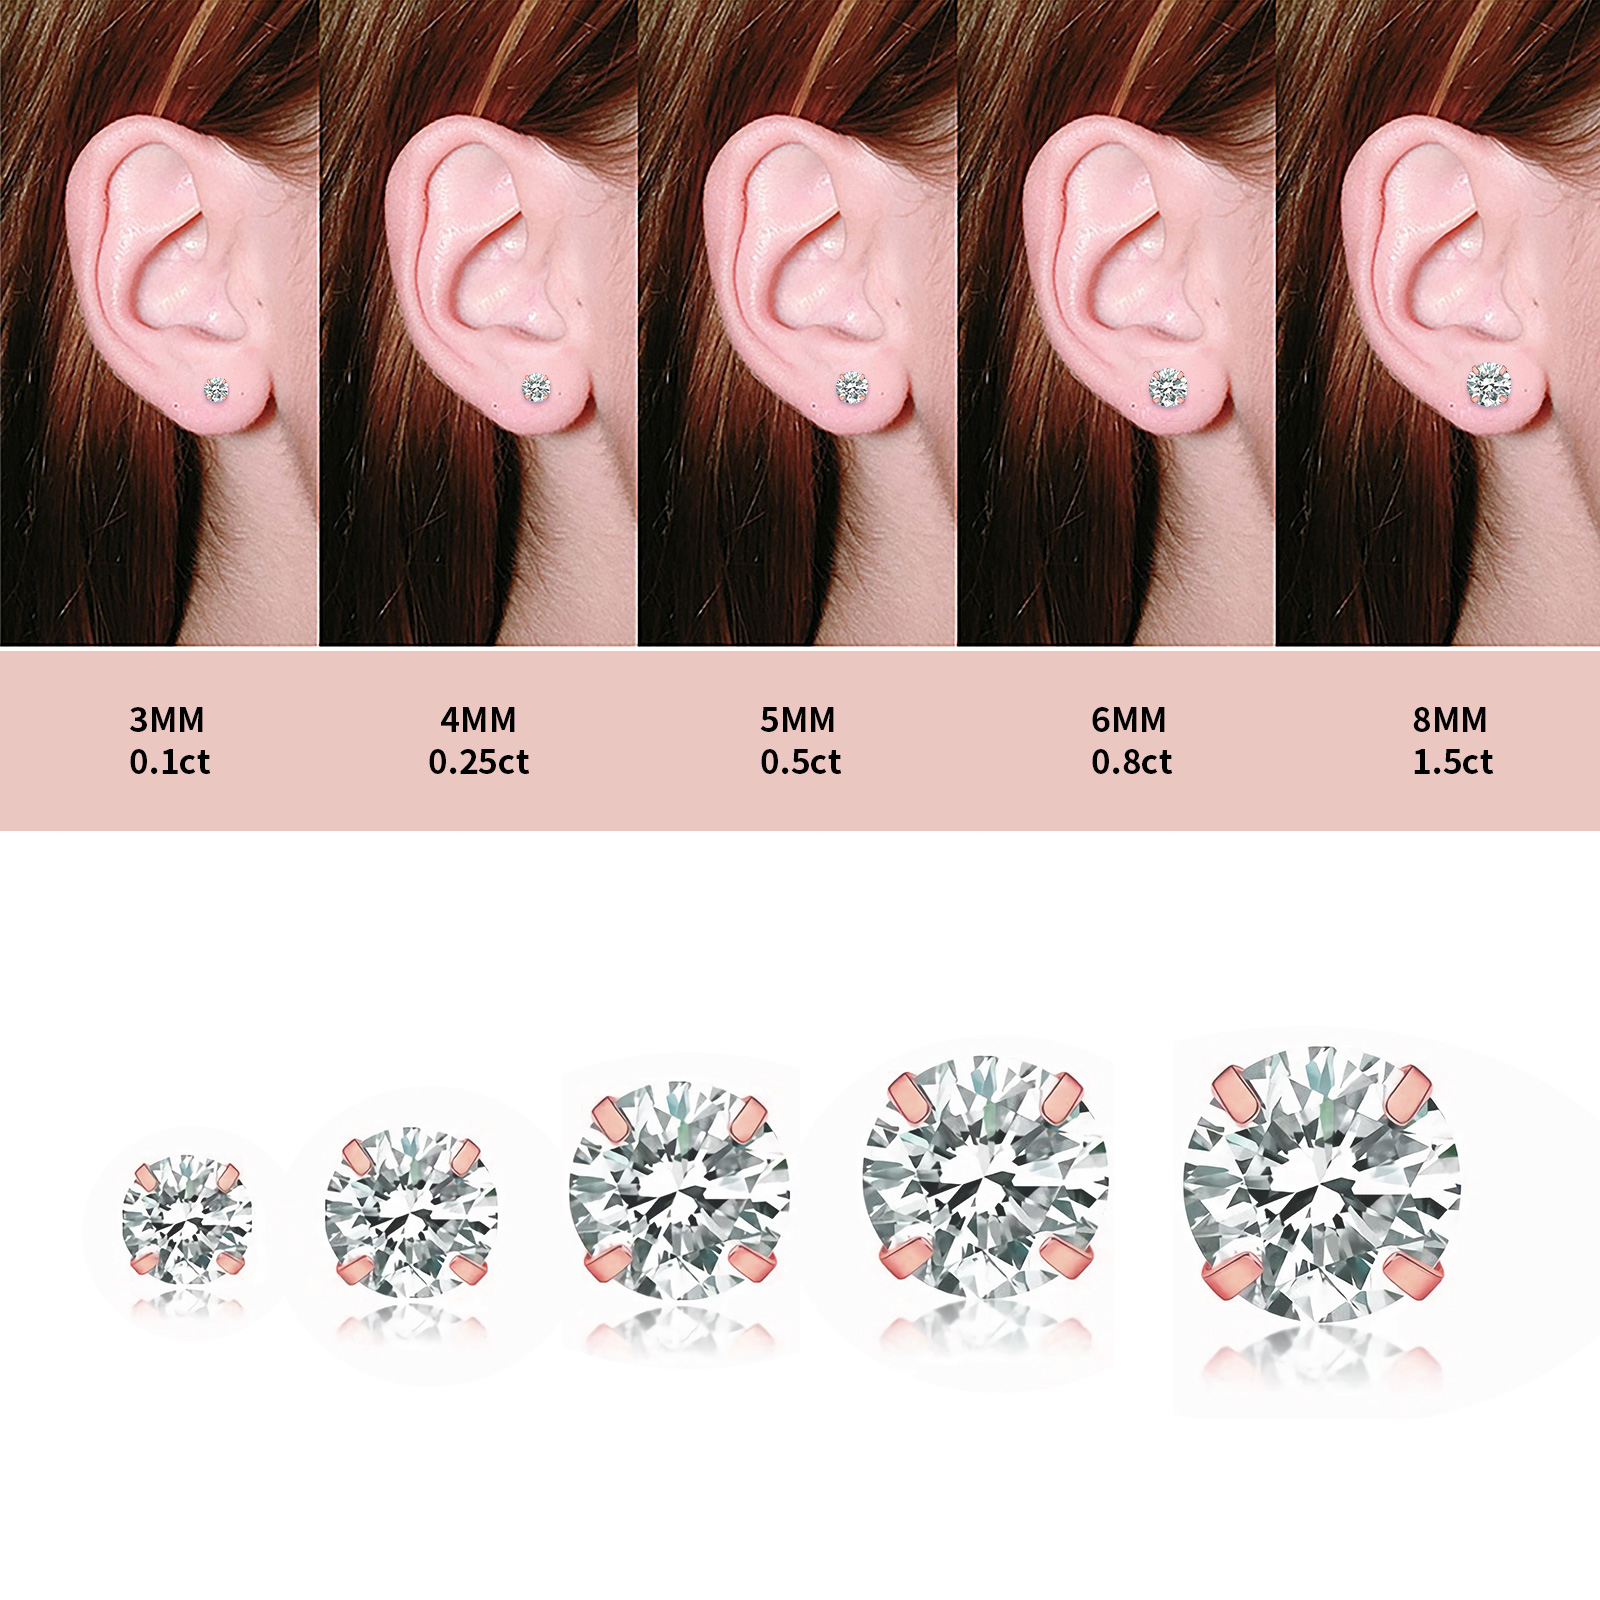 10K Rose Gold Earrings for Women Created White Sapphire Round Stud Earrings Plated for Women (8mm) - image 3 of 9